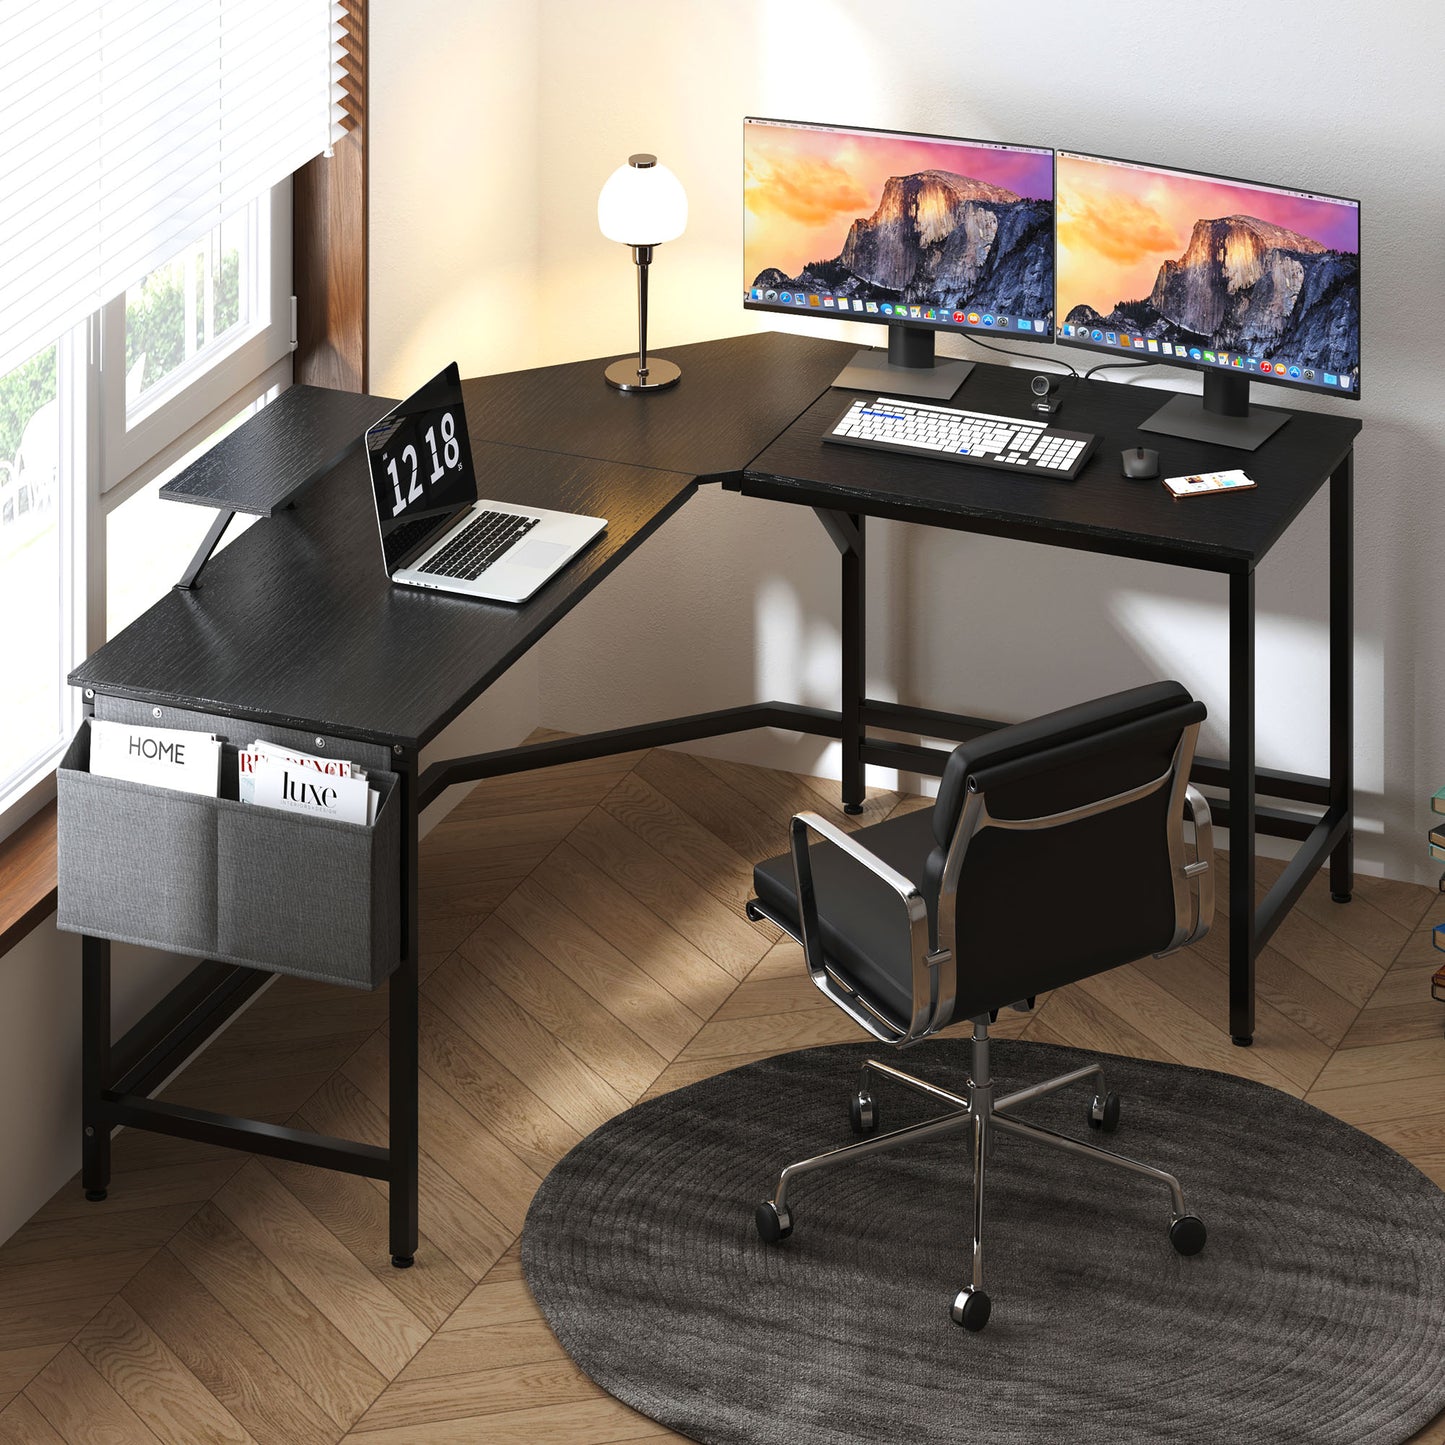 Soges L-shaped Desk Corner Computer Table Game Table Office Workstation Table, A Variety of Use Functions, Modern Simple Design